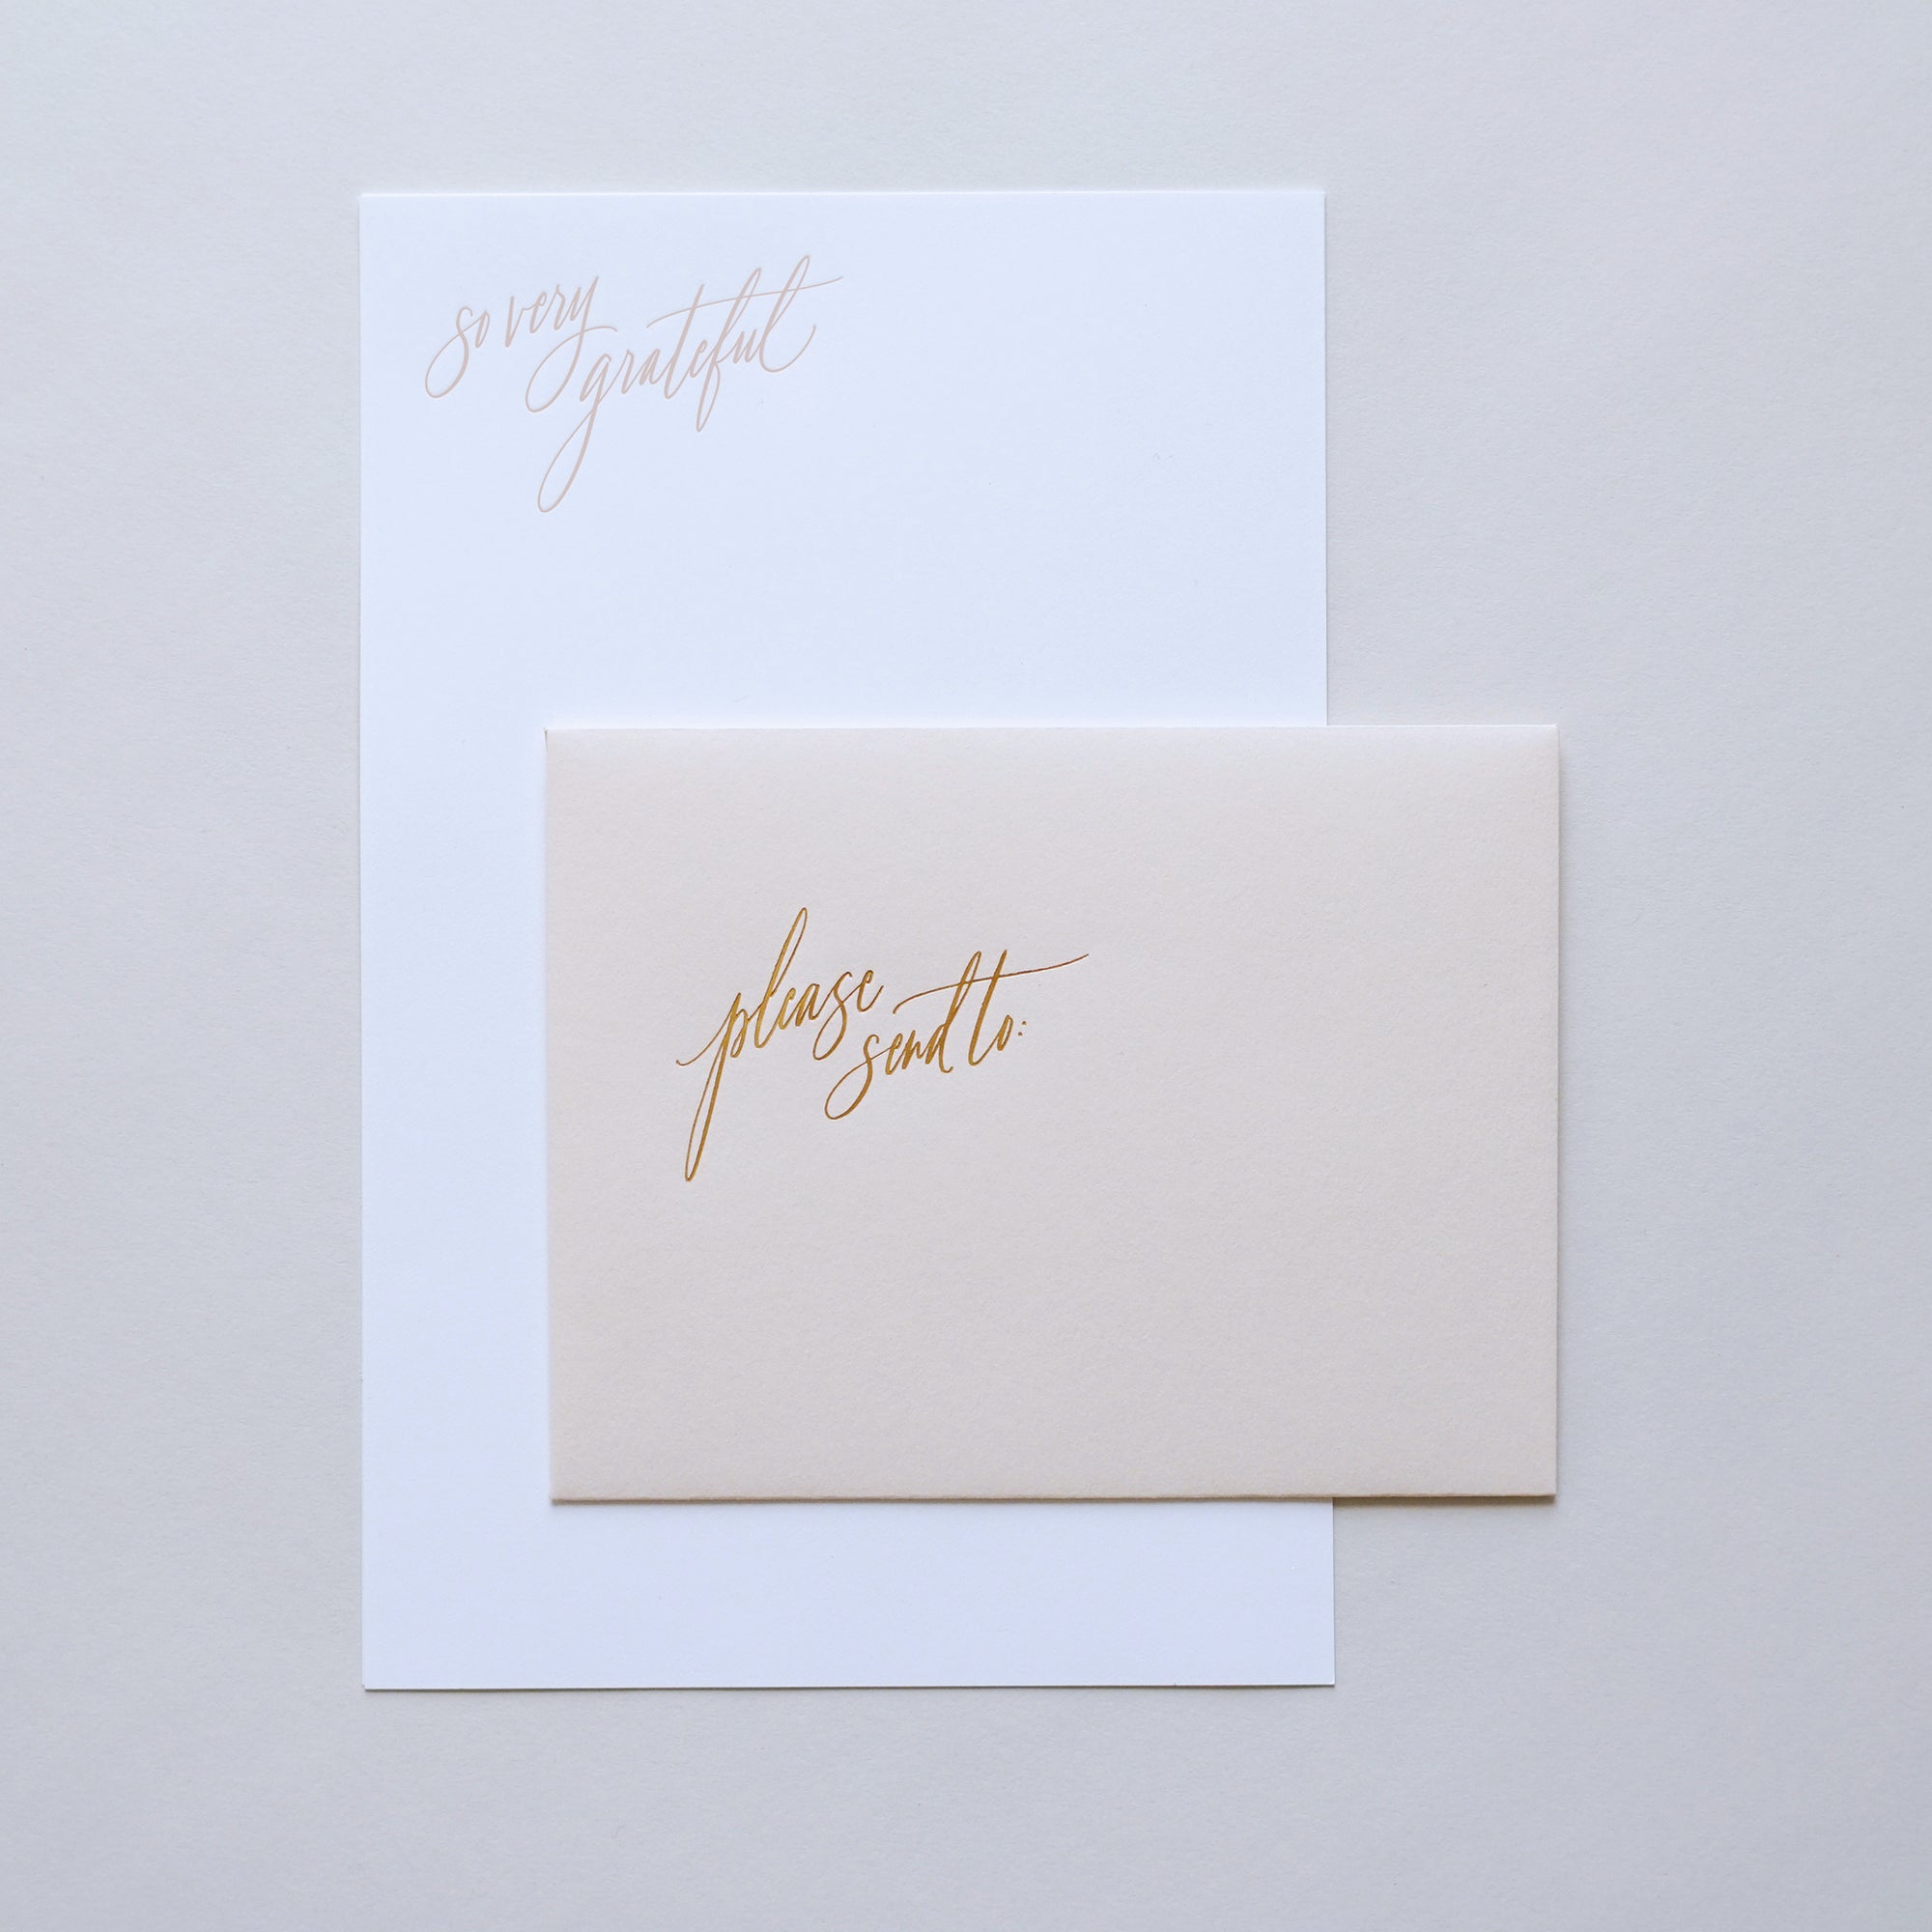 The "So Very Grateful" letter writing set with blush envelope.